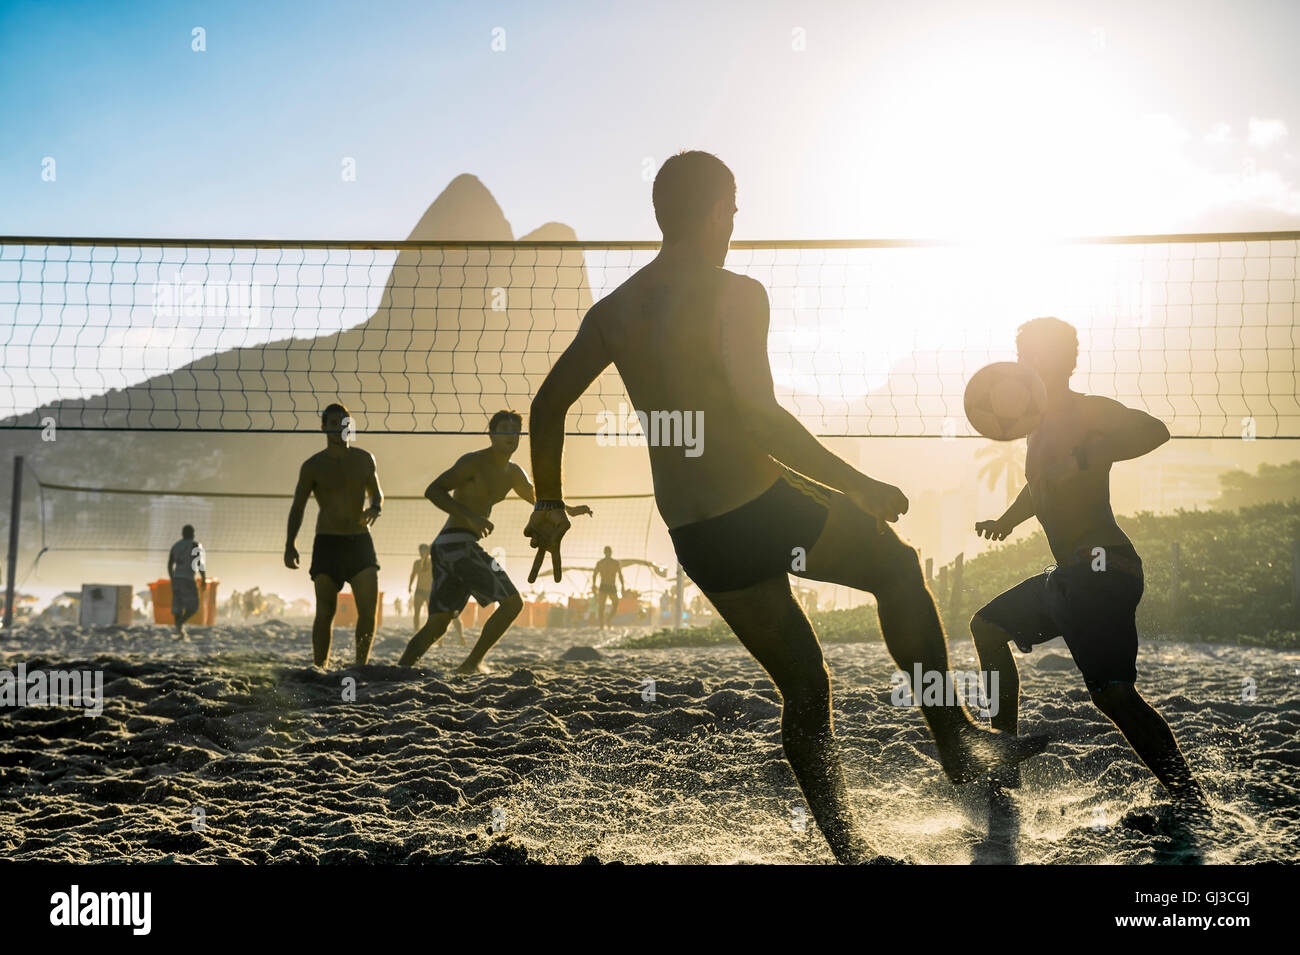 Silhouettes of carioca Brazilians playing futevolei (footvolley) against a sunset backdrop of Dois Irmaos Two Brothers Mountain Stock Photo